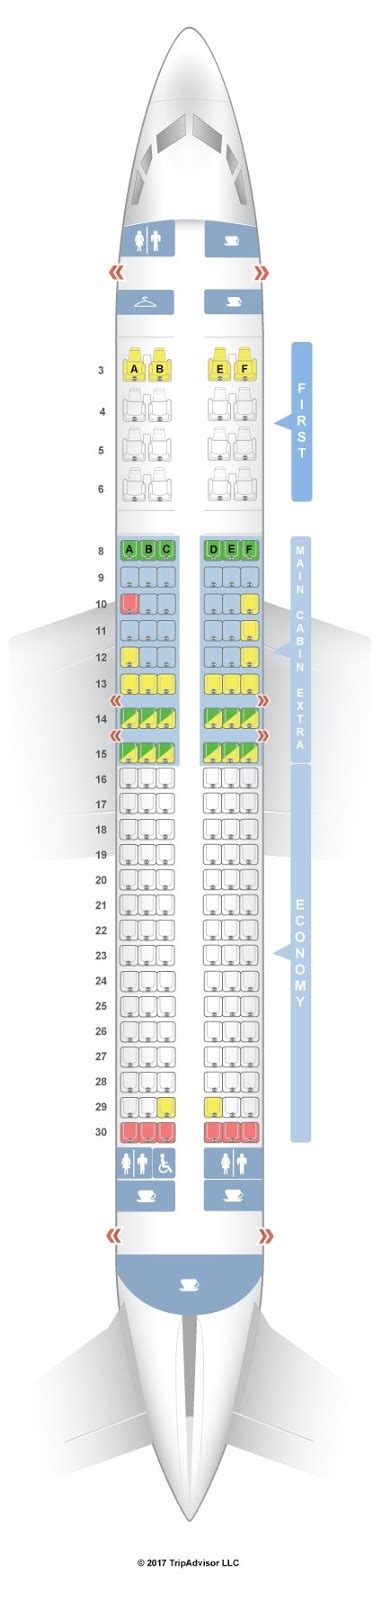 Boeing 737-800 american seat map. Singapore Airlines Boeing 737 aircraft seat map. Singapore Airlines operates the following models of Boeing, 737-800, 737 MAX 8. As of 2022, the company has nine 737-800s, ten 737 MAX 8s in its fleet. The airline selected these aircraft because they are built with the latest technology and are among the most reliable aircraft in the world. 